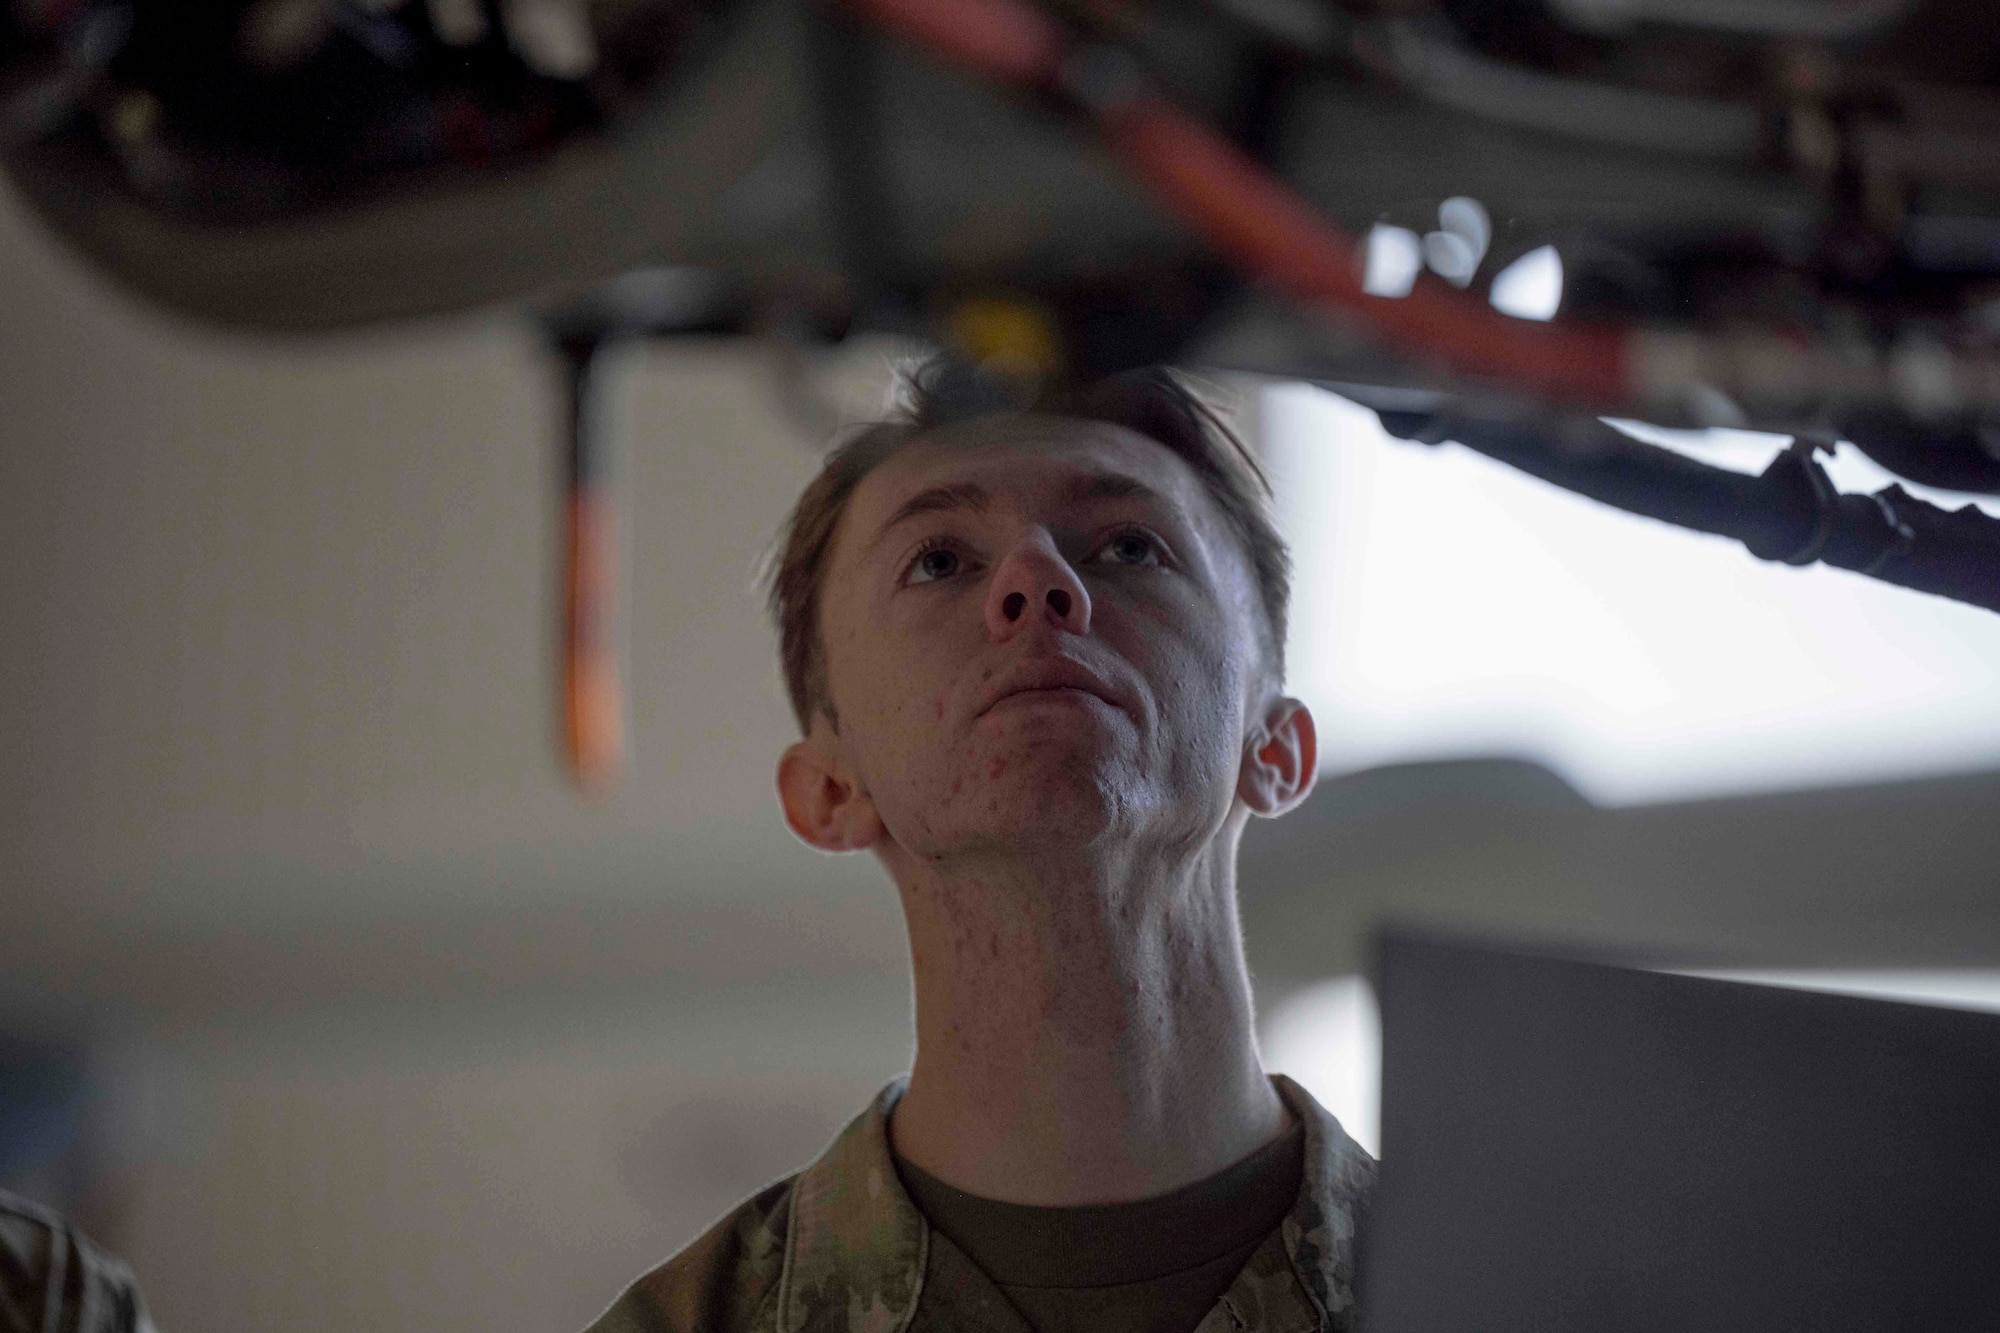 U.S. Air Force Airman 1st Class Alexander MacWithey, 49th Component Maintenance Squadron precision measurement equipment laboratory journeyman, examines the engine of an MQ-9 Reaper during a job swap event at Holloman Air Force Base, New Mexico, April 28, 2023. The purpose of the event was for Airmen to go out to different groups and squadrons to shadow other career fields. (U.S. Air Force photo by Senior Airman Antonio Salfran)